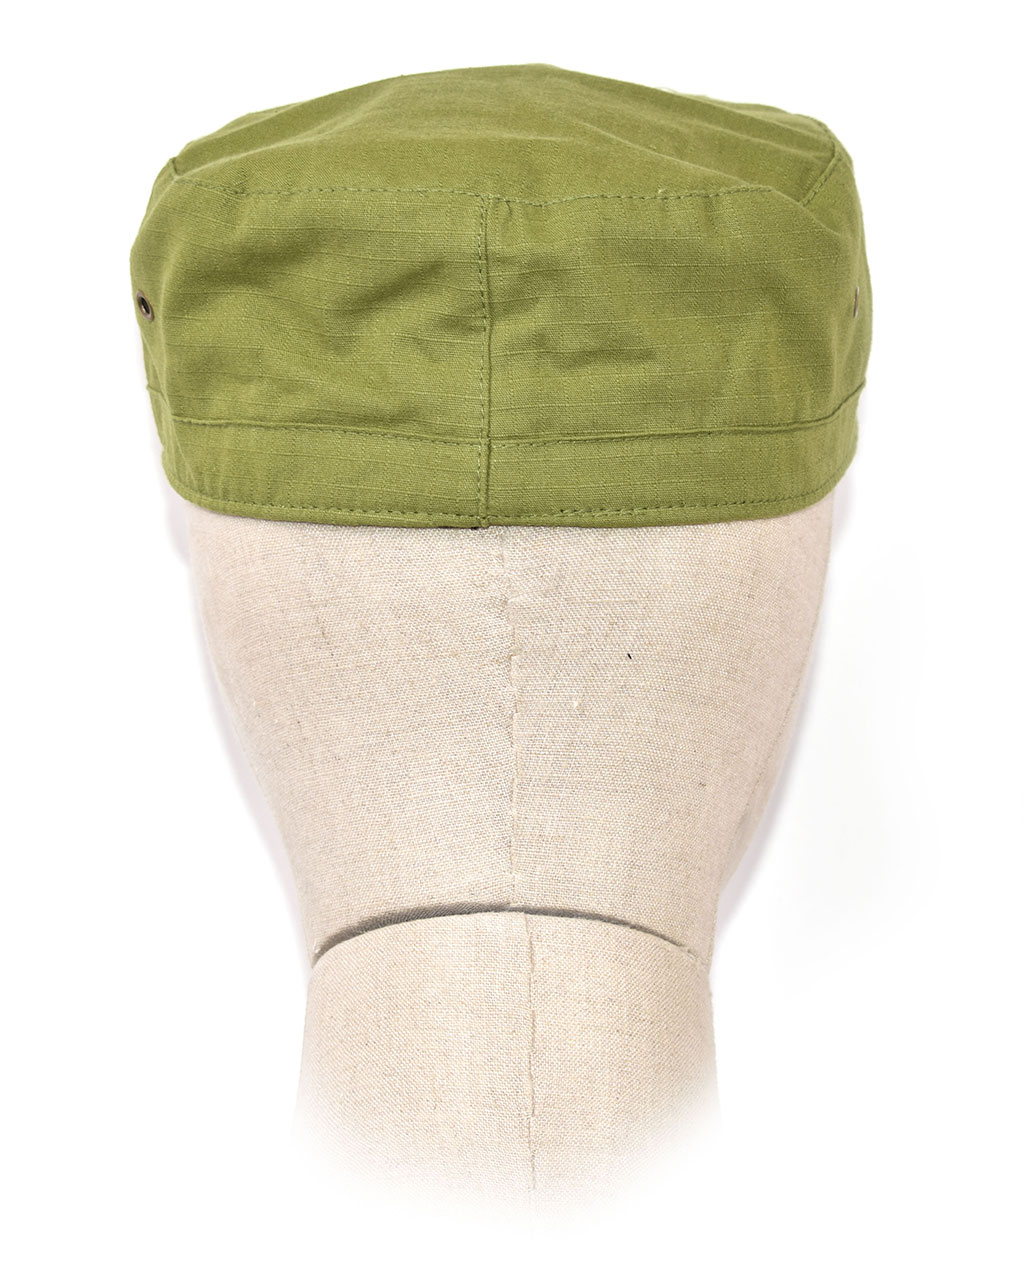 Кепка ALPHA INDUSTRIES ARMY HAT light olive 